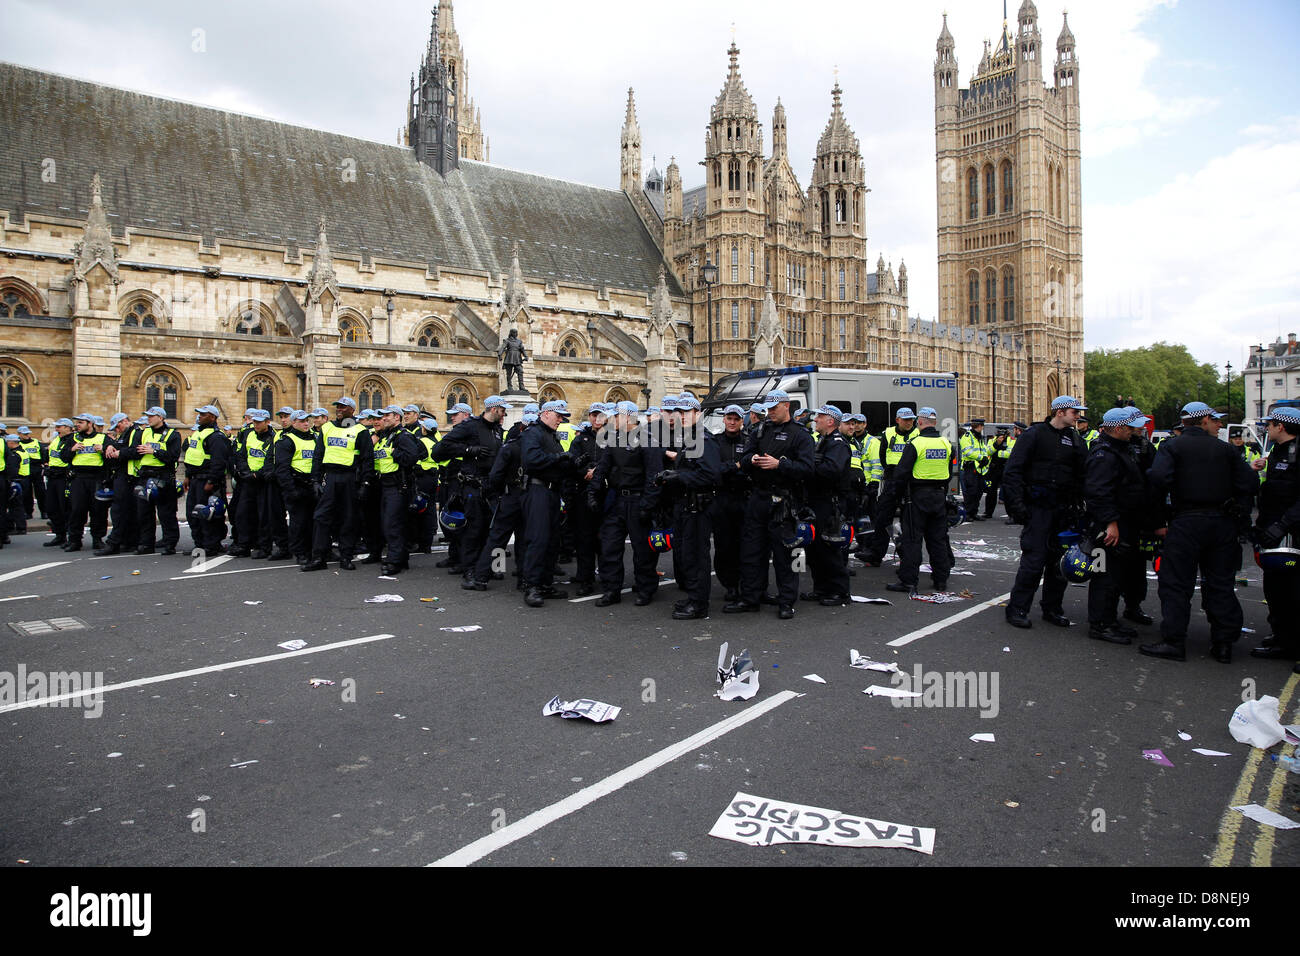 London, UK. 1st June 2013. Rally at Westminster against the BNP national party by anti fascist campaigners. Credit:  Lydia Pagoni/Alamy Live News Stock Photo